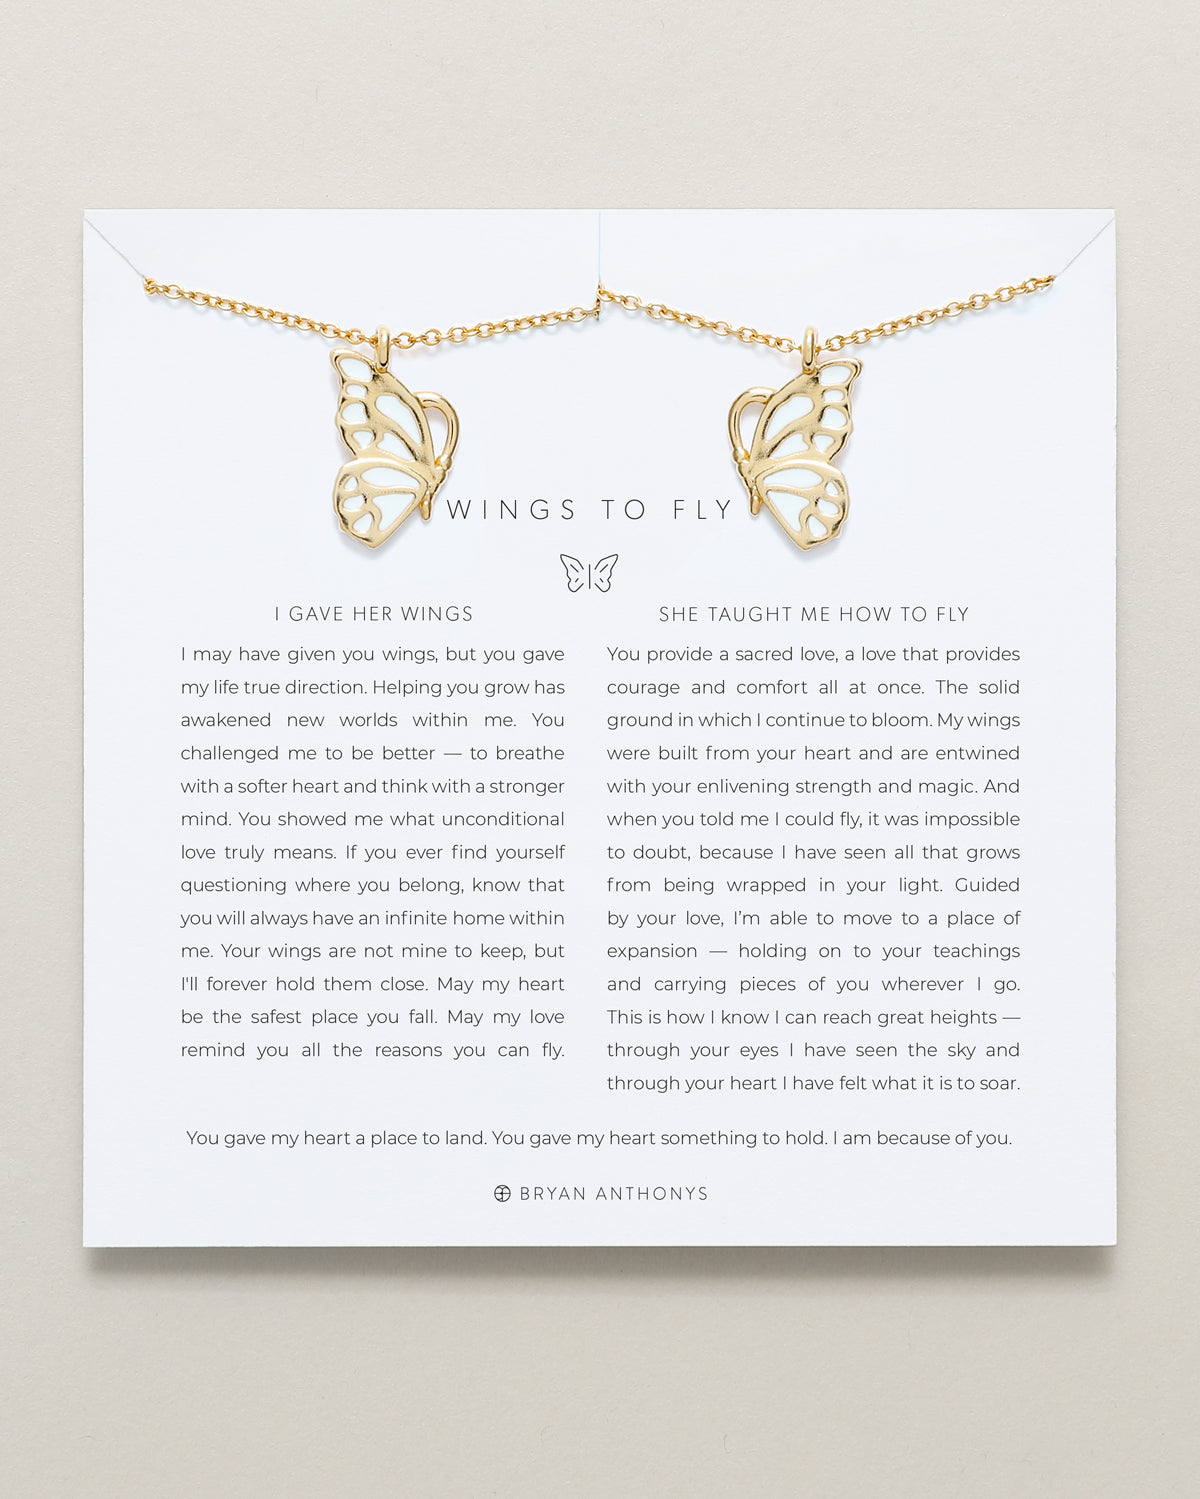 Bryan Anthonys Mother-Daughter Butterfly Wings to Fly Necklace Set 14k Gold